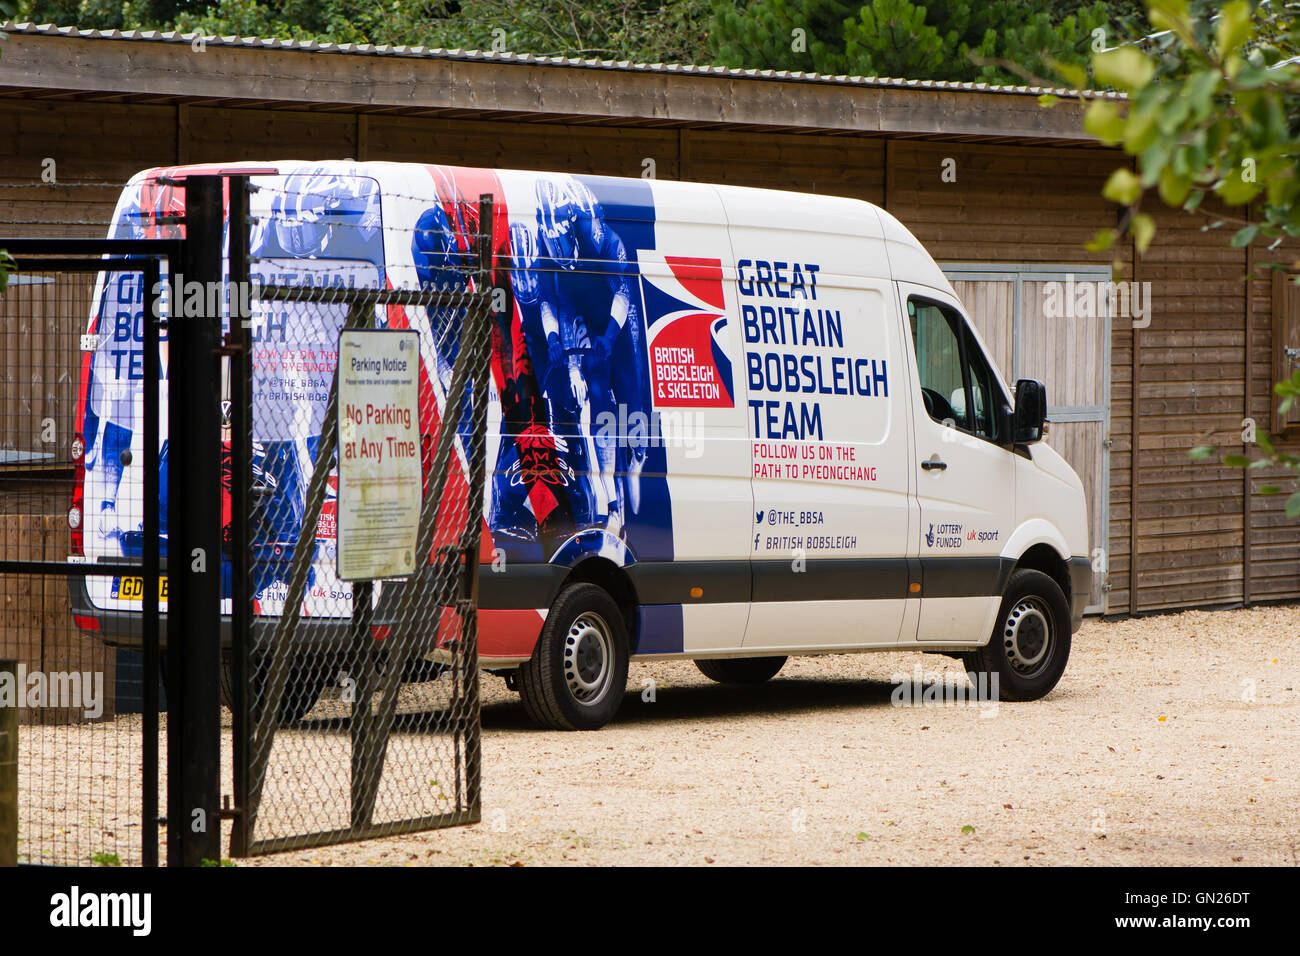 Great British Bobsleigh Team van at Bath University iln ivery of British winter sports team, 'on the path to Pyeonchang' Stock Photo